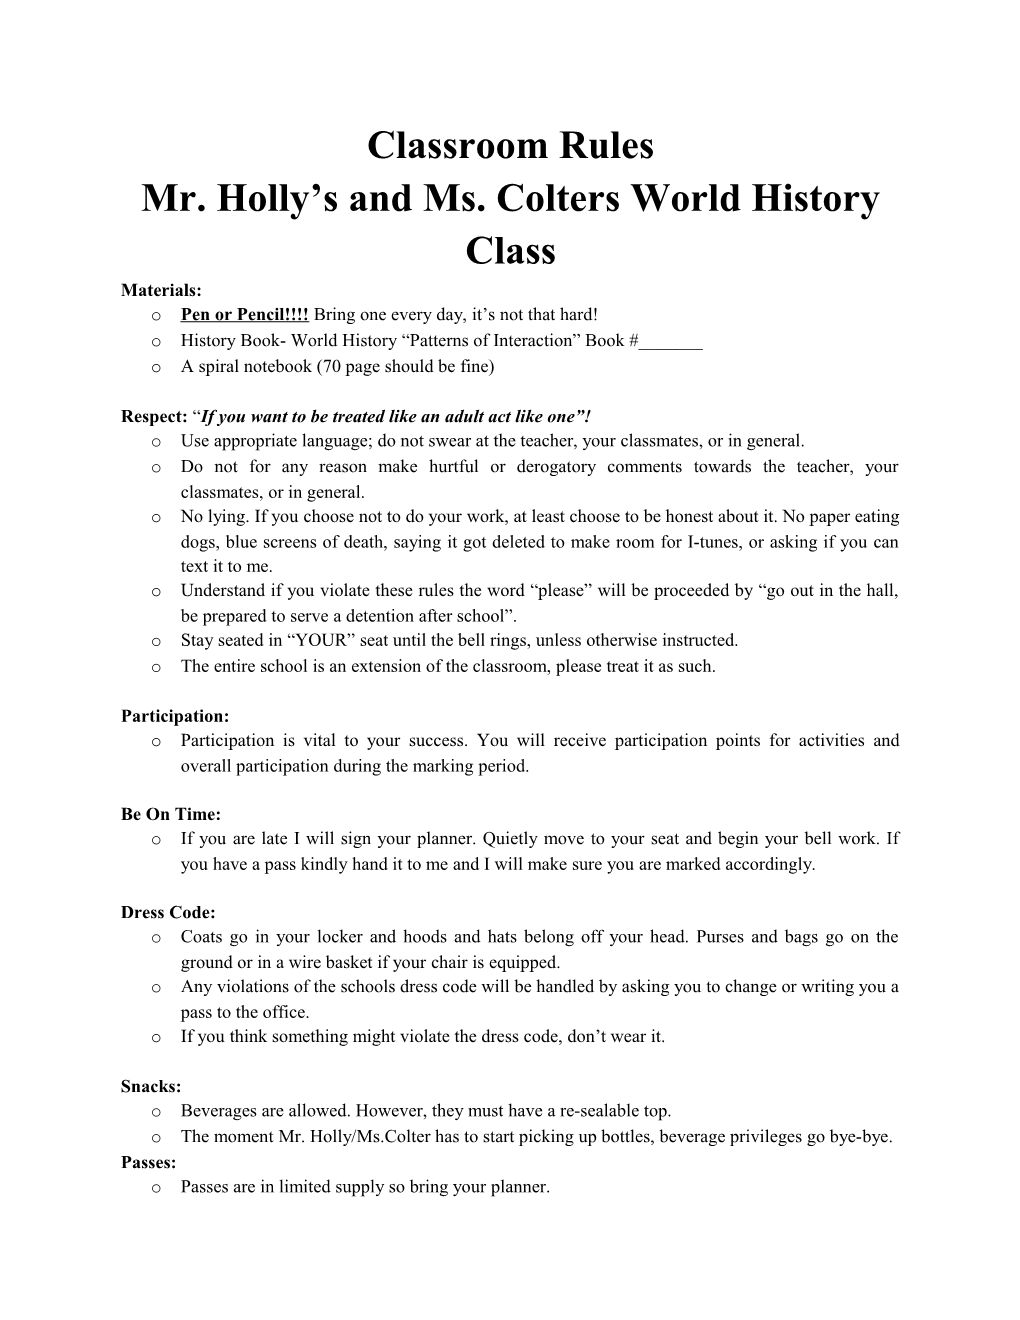 Mr. Holly Sand Ms. Colters World Historyclass